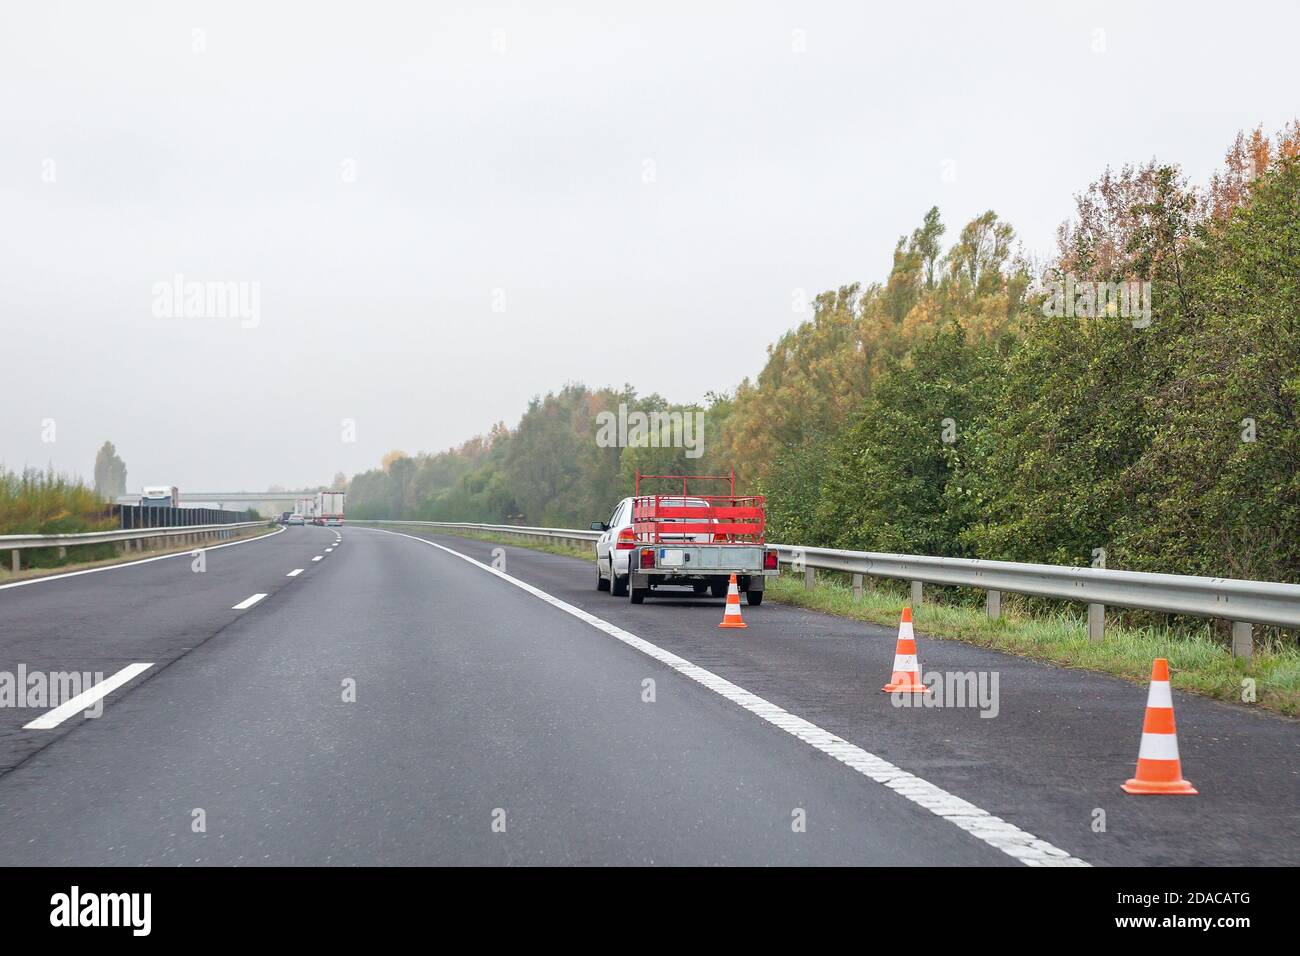 Faulty car with red trailer and traffic cones on emergency stopping lane on roadside. Problem with vehicle on the highway Stock Photo